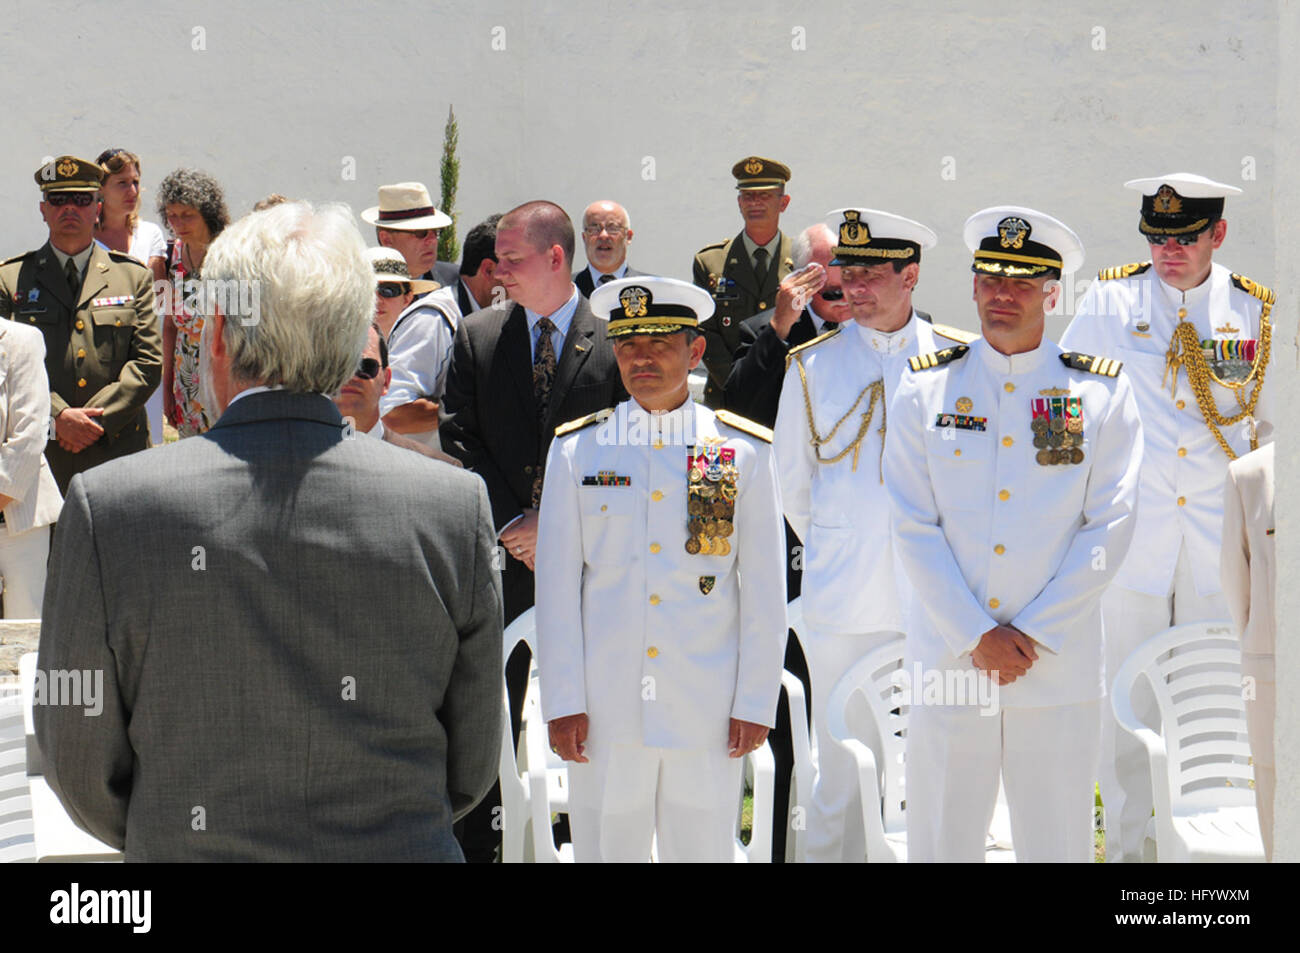 Vice Adm. Harry B. Harris, commander U.S. 6th Fleet, front-center, and Cmdr. Sean Anderson, commanding officer guided-missile destroyer USS Bulkeley (DDG 84), front-right, listen with other guests as British Ambassador Giles Paxman speaks during a memorial ceremony at the Anglo-Americano Cemetery in Menorca, Spain. Bulkeley is deployed as part of Enterprise Carrier Strike Group (CSG) in support of maritime security operations and theater security cooperation efforts in the U.S. 6th Fleet AOR. (U.S. Navy photo by Mass Communication Specialist 3rd Class Lauren G. Randall) USS Bulkeley operations Stock Photo